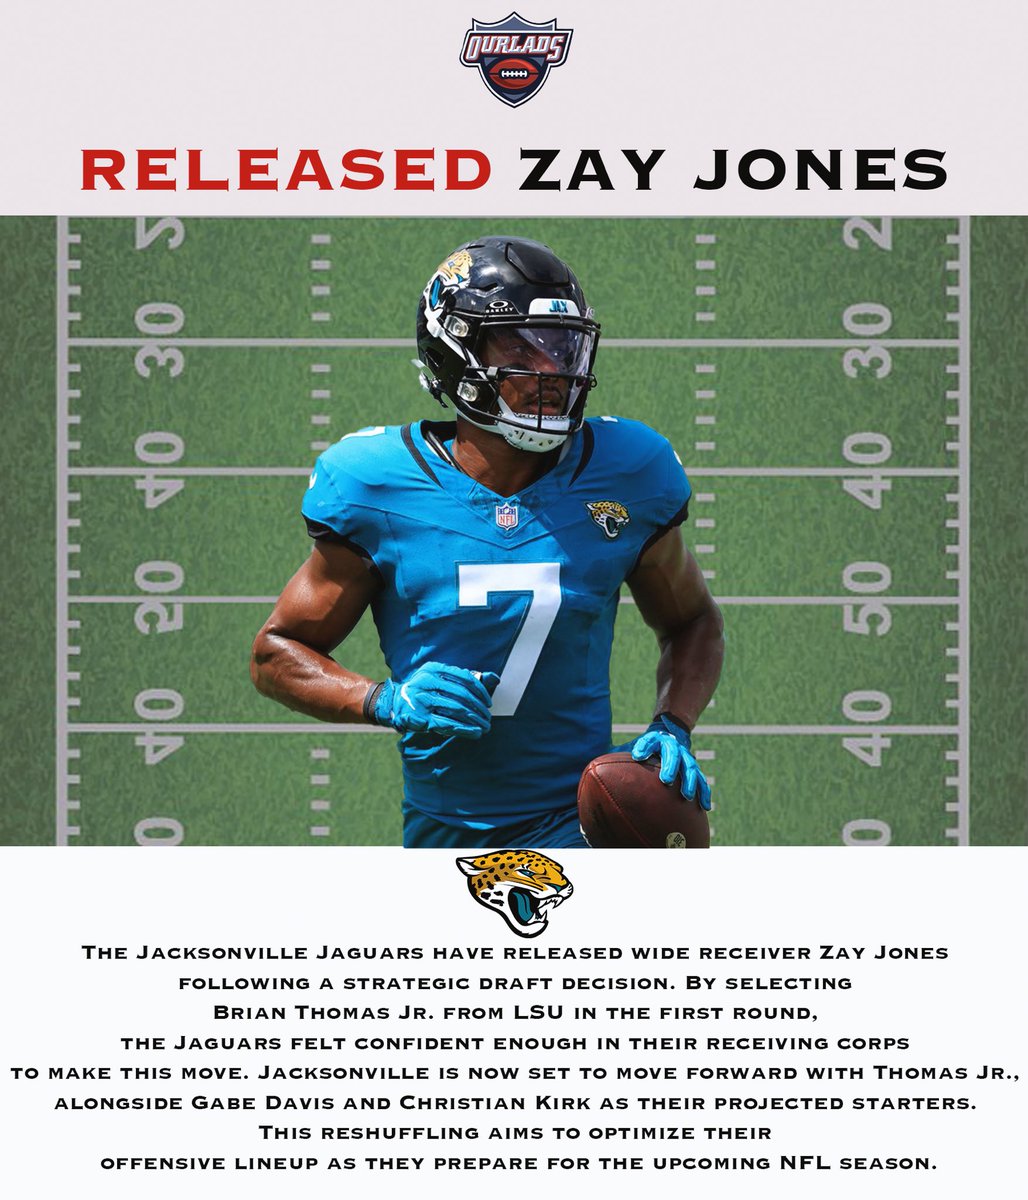 🚨 Roster Update: The #Jaguars have released WR Zay Jones following their first-round pick of LSU's Brian Thomas Jr. 🌟 Jacksonville is setting the field with Thomas Jr., Gabe Davis, and Christian Kirk leading the charge. Exciting times ahead! 🏈💥 #NFL #JacksonvilleJaguars